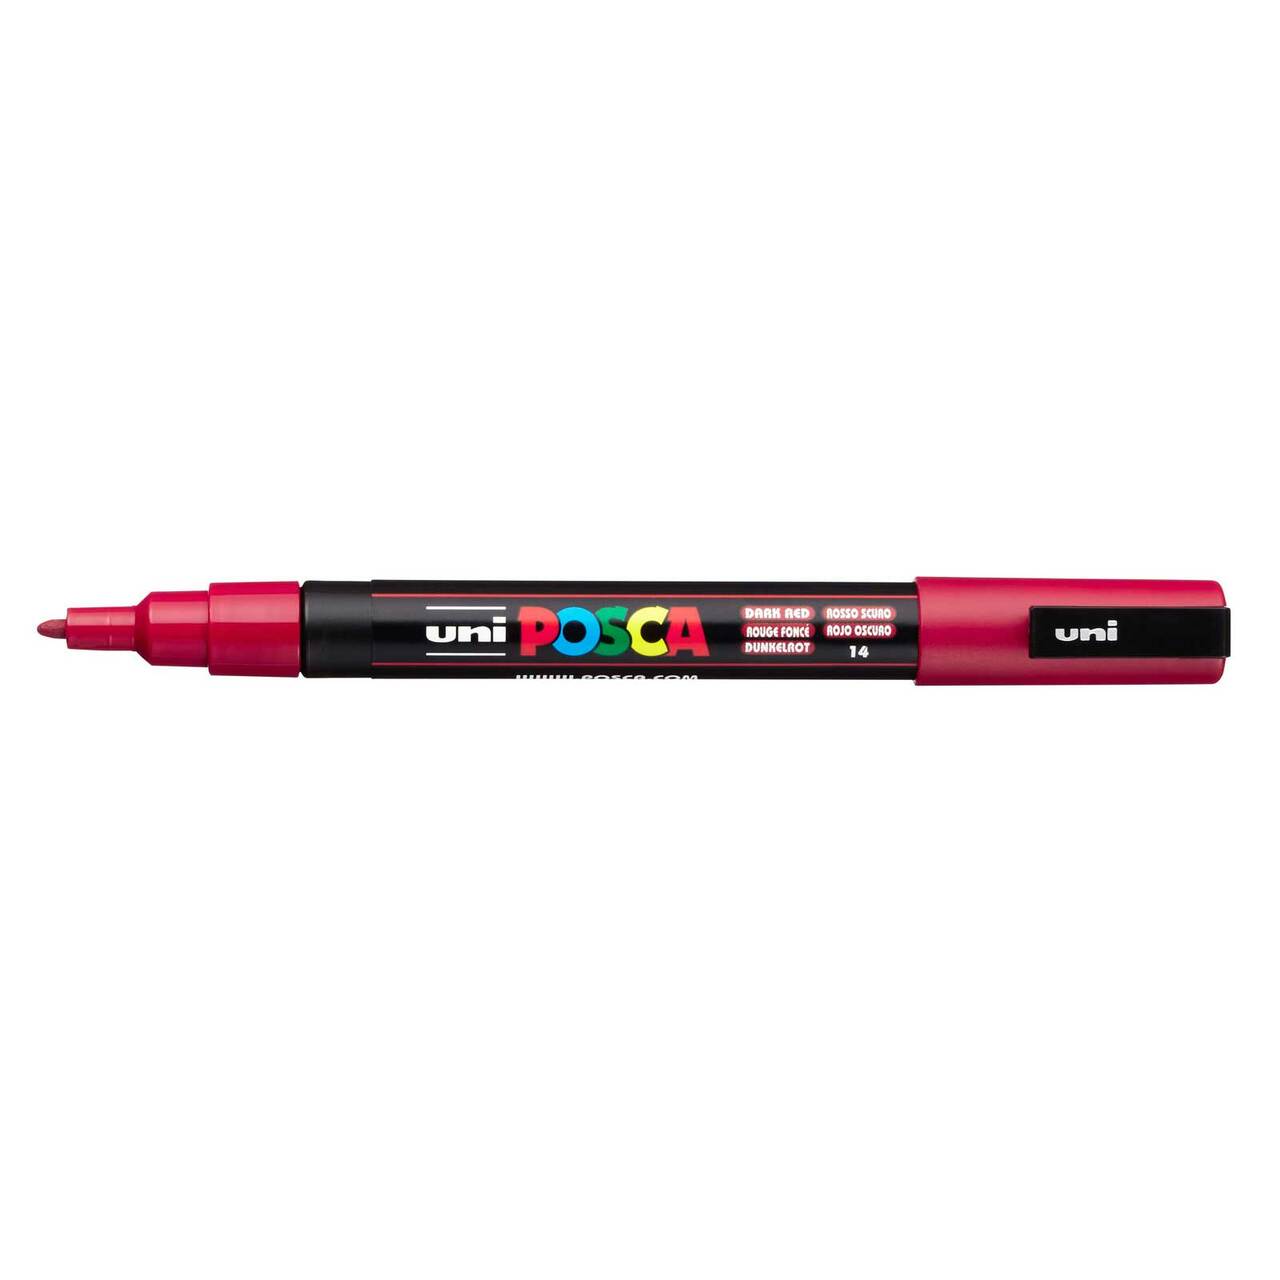 POSCA Acrylic Paint Markers - PC-3M 0.9-1.3mm Bullet Tip - Dark Red by POSCA - K. A. Artist Shop